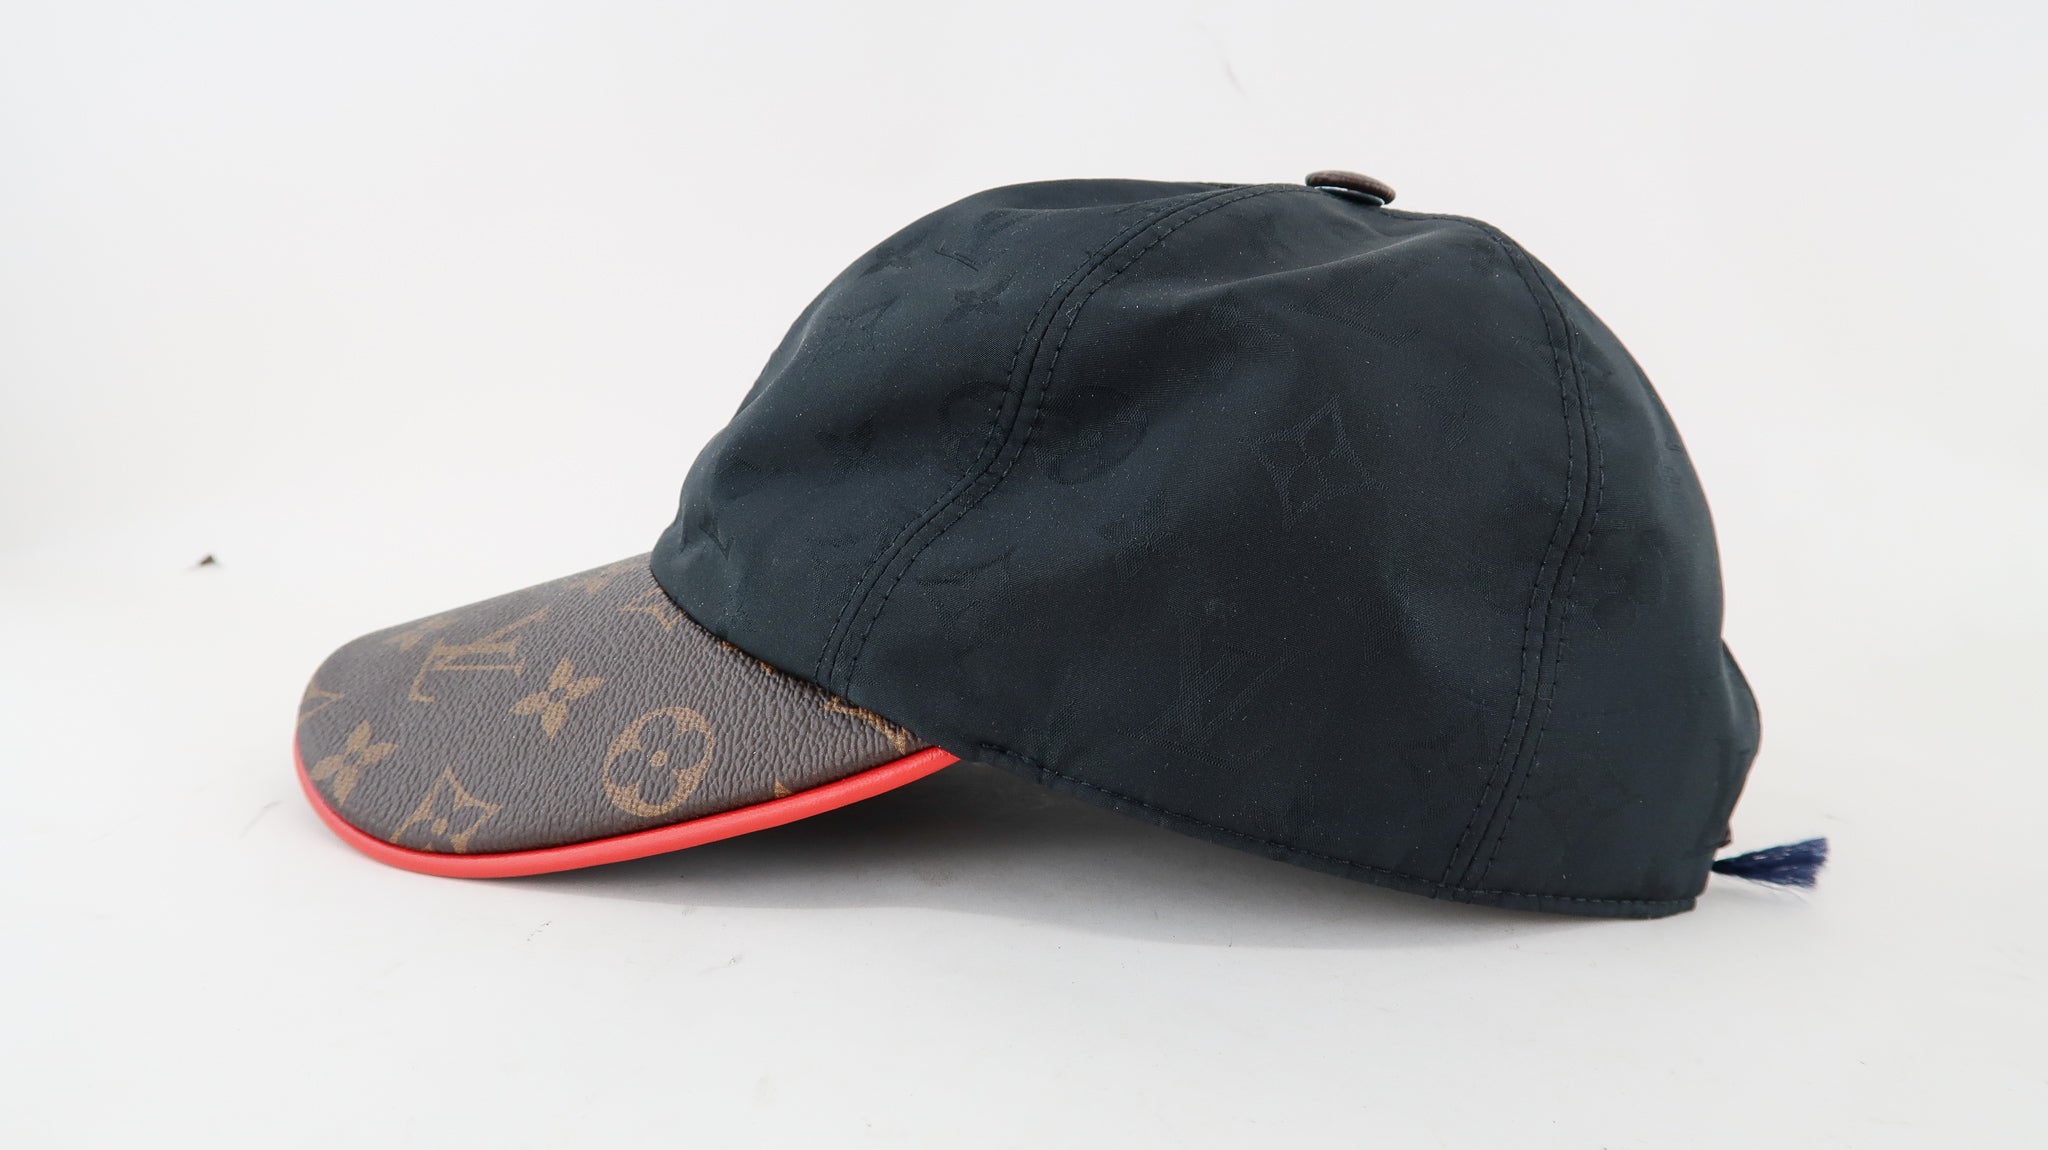 Anyone know where I can buy this LV hat from? I've seen this hat but the LV  letters is black when it's suppose to be grey which is a blatant give away.